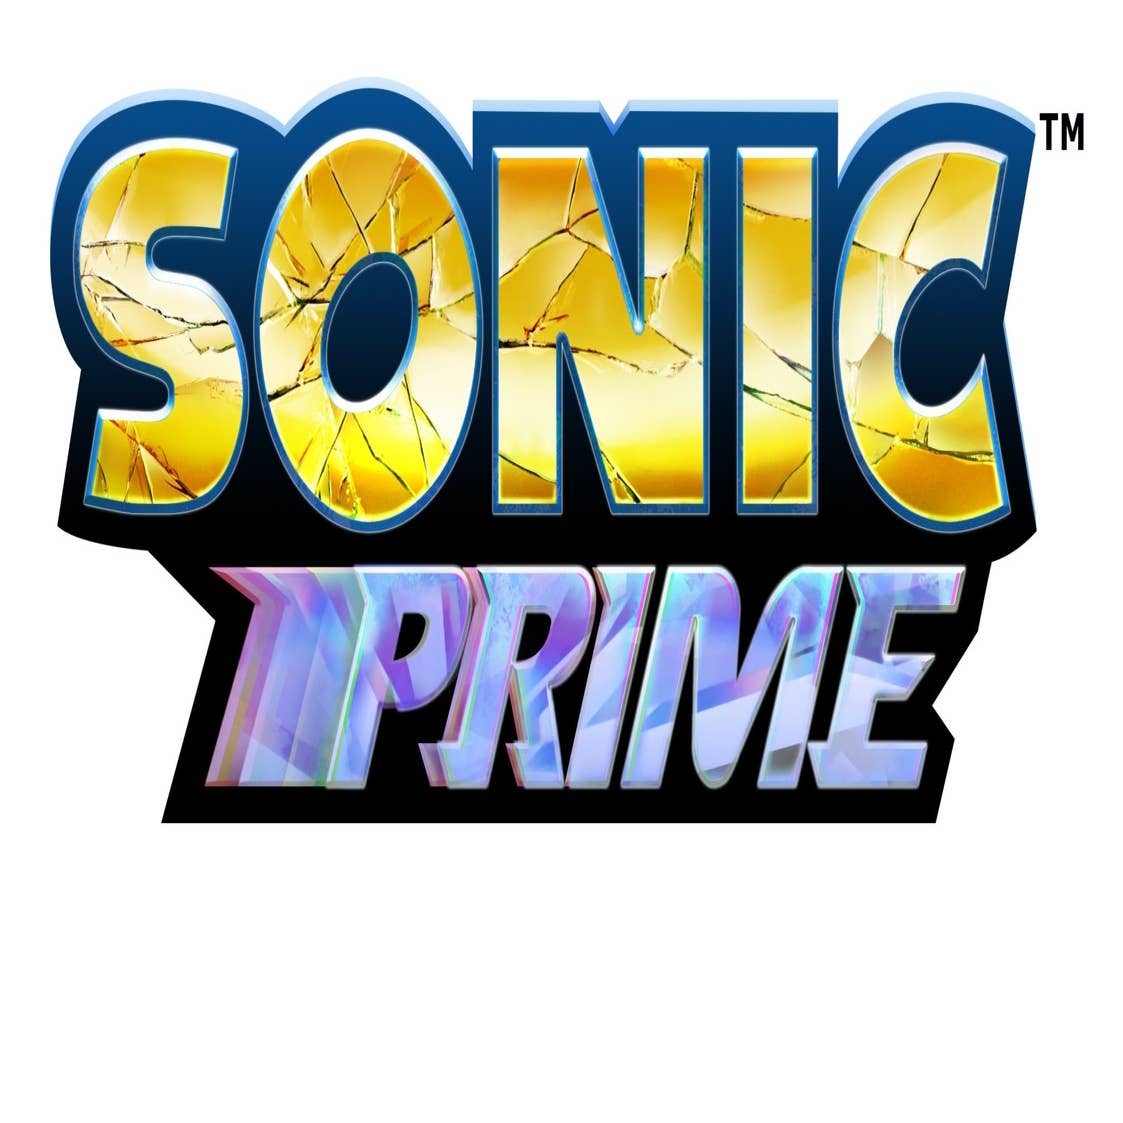 Sonic Prime Netflix Series Release Date Confirmed for December